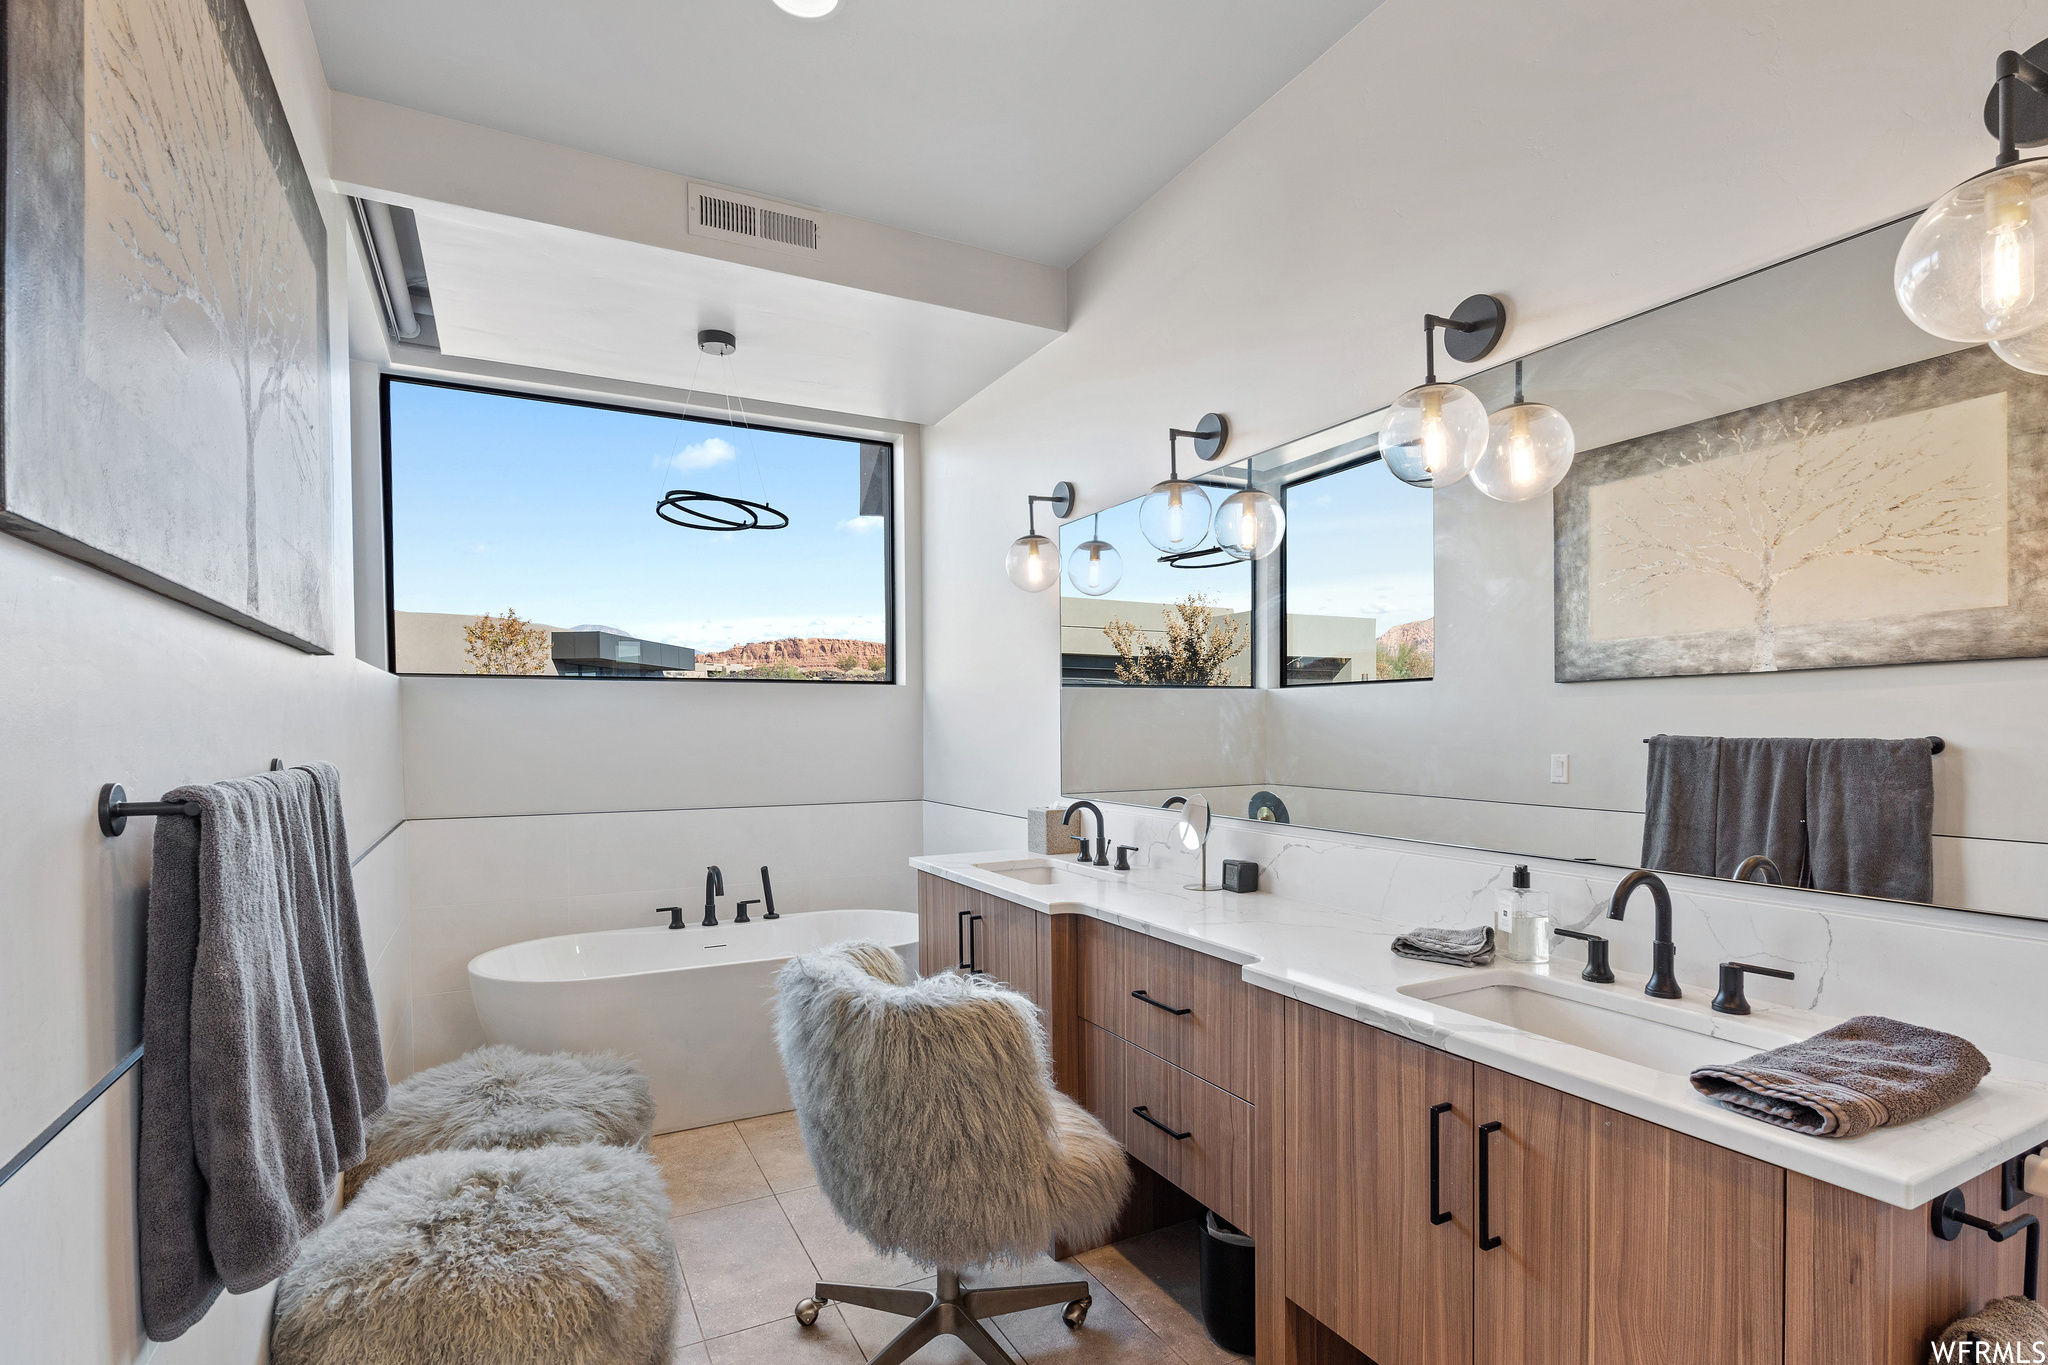 Bathroom featuring tile floors, dual vanity, and a bath to relax in